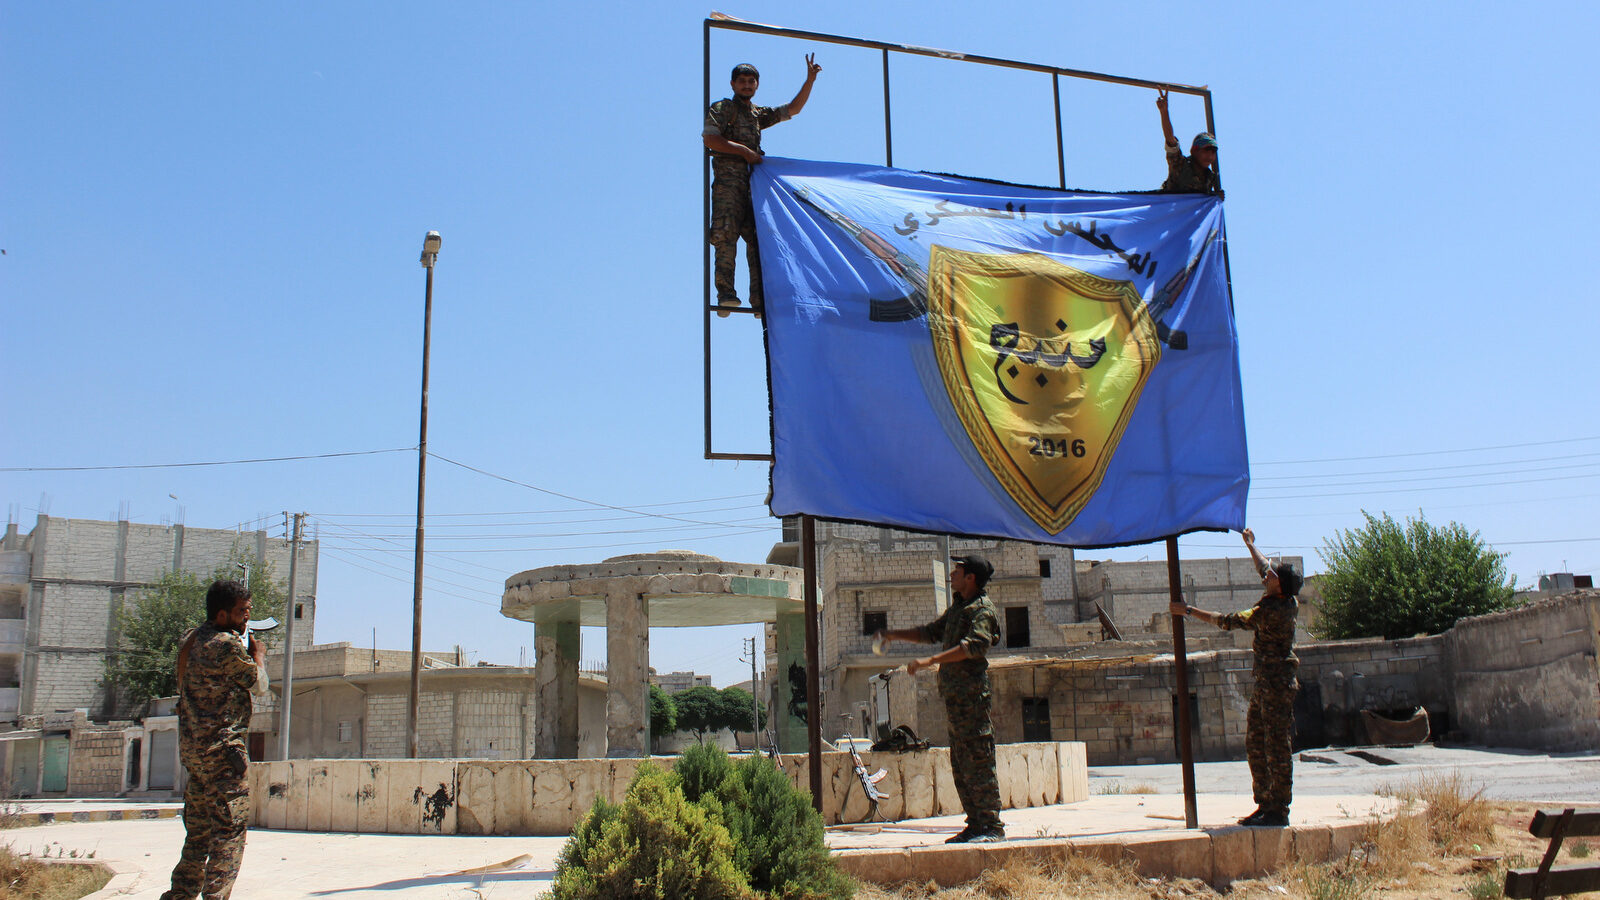 U.S.-backed, Kurdish-led Syria Democratic Forces raise their flag in the center of the town of Manbij after driving ISIS out of the area, in Aleppo province, Syria. (ANHA via AP)